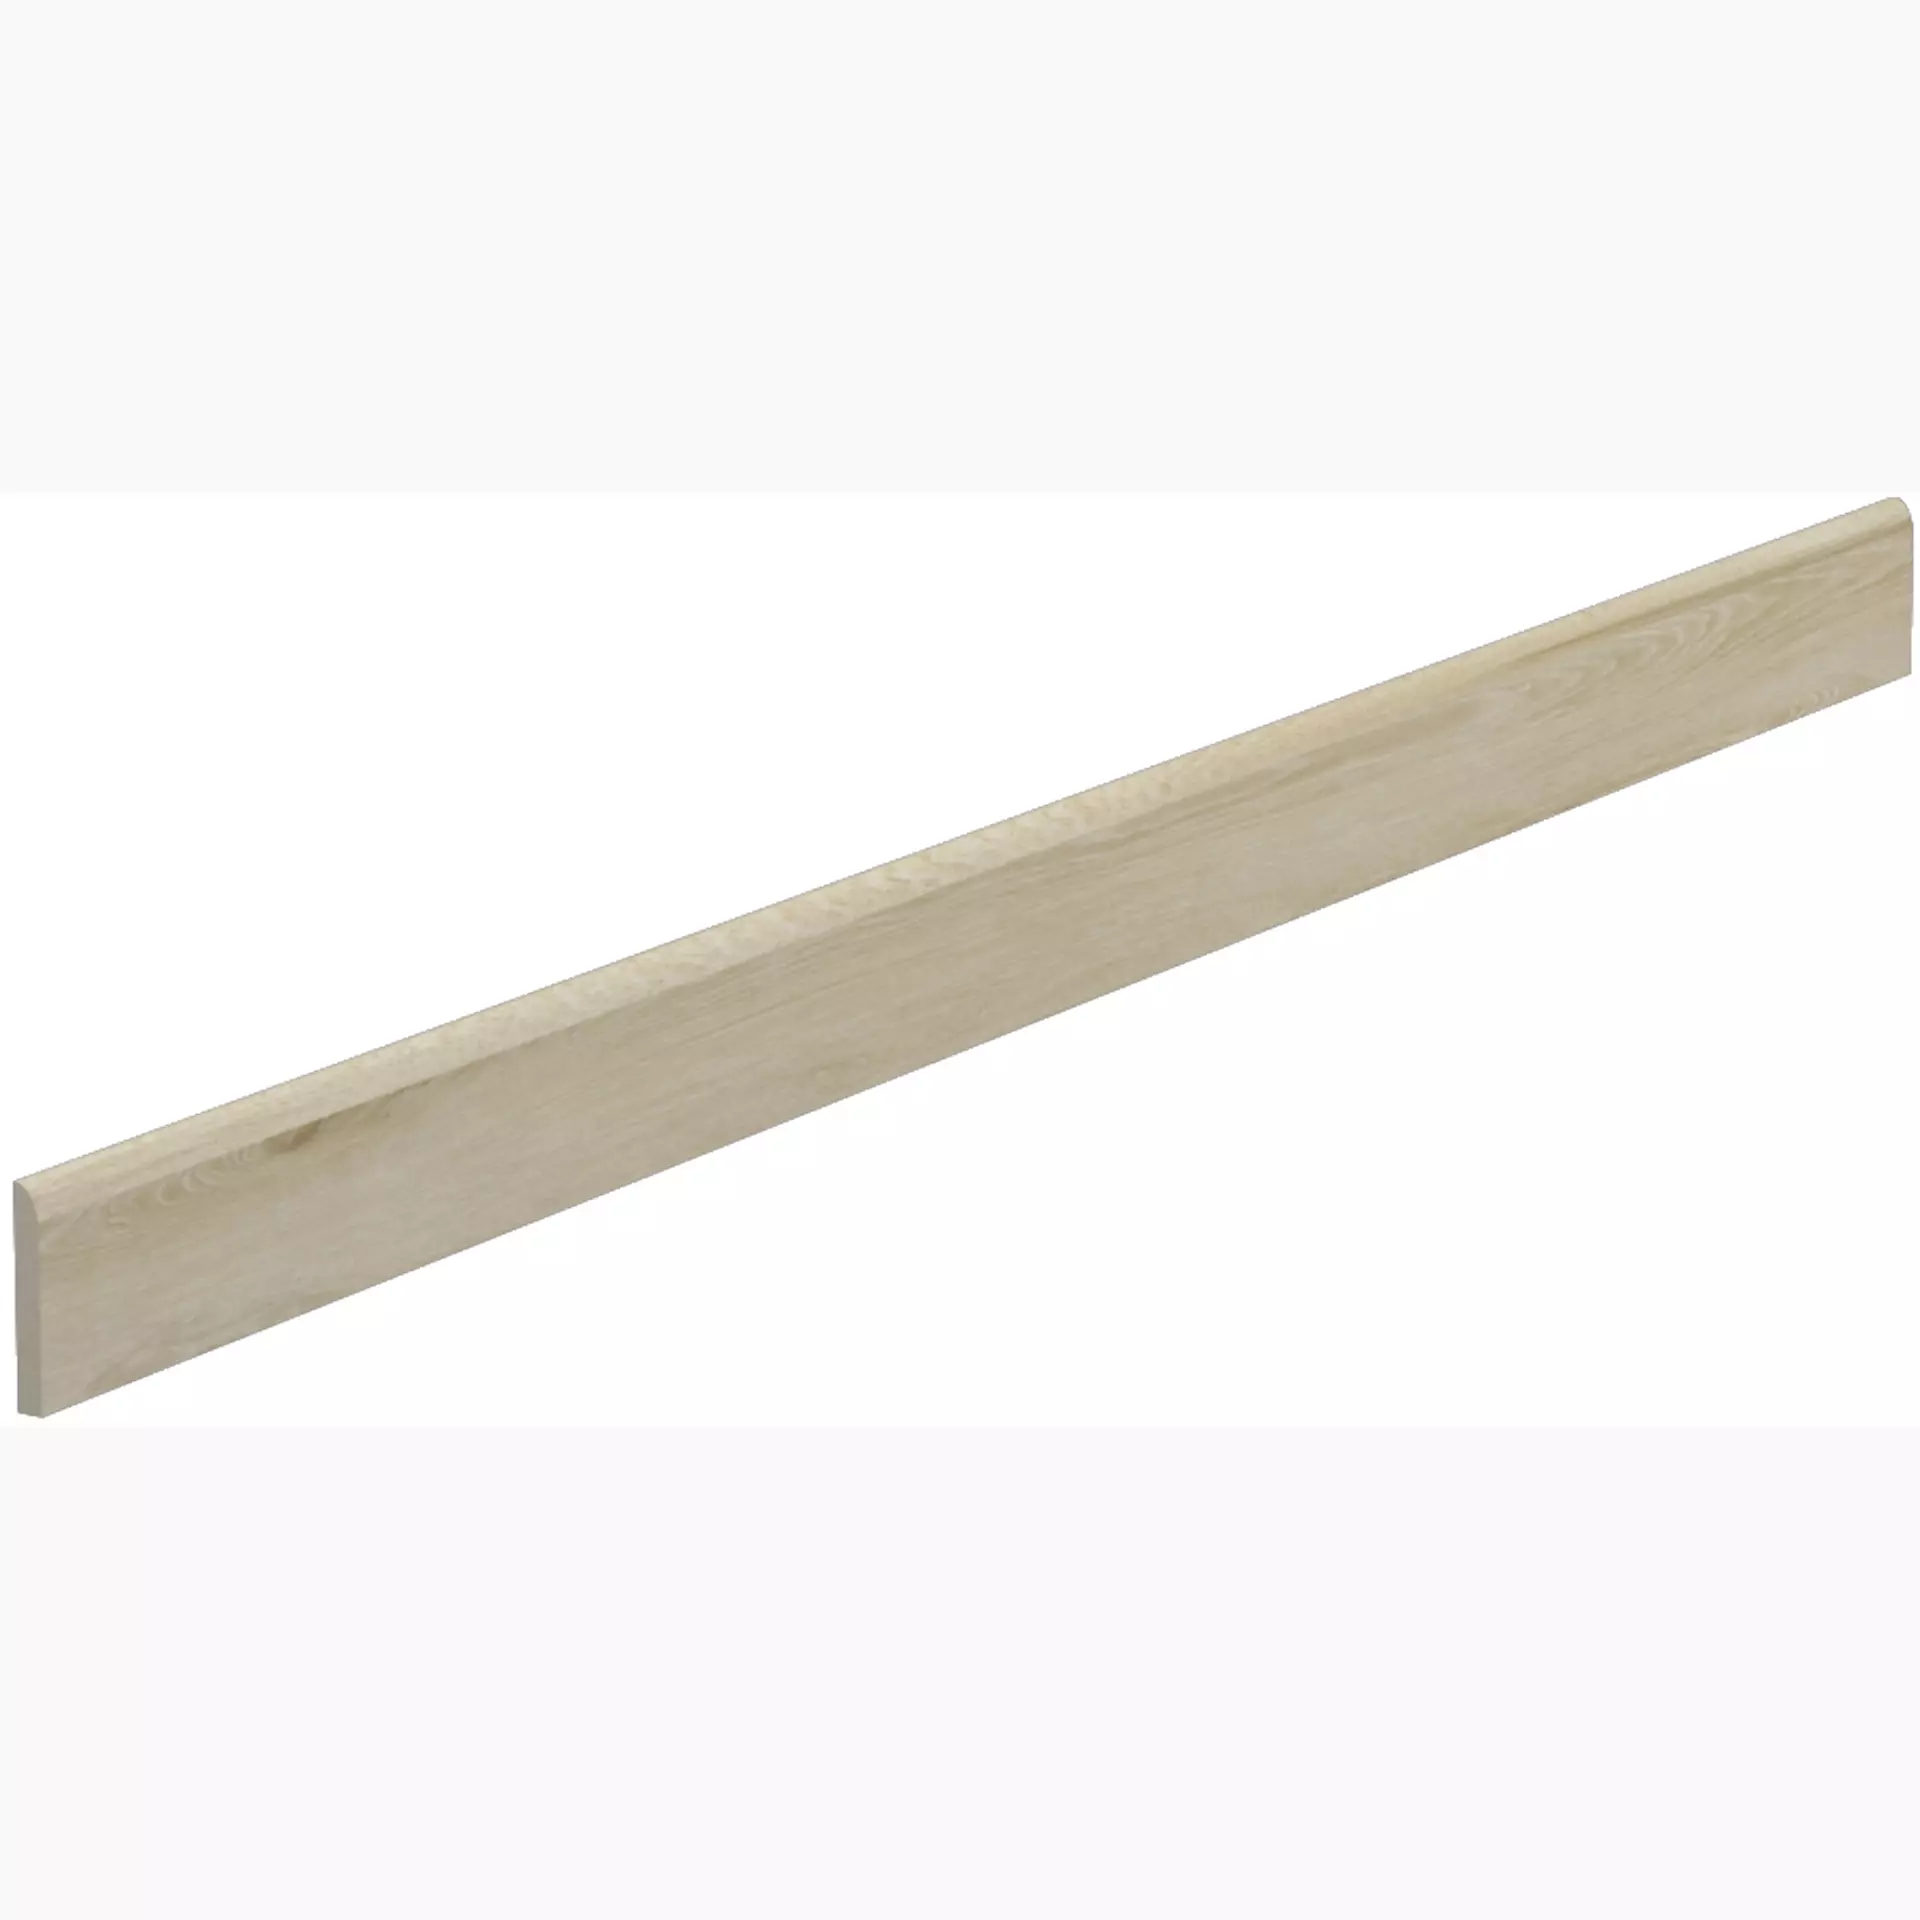 Del Conca Nb Nabi Taupe Nb3 Naturale Skirting board 13NB03R12 6,5x120cm rectified 8,5mm